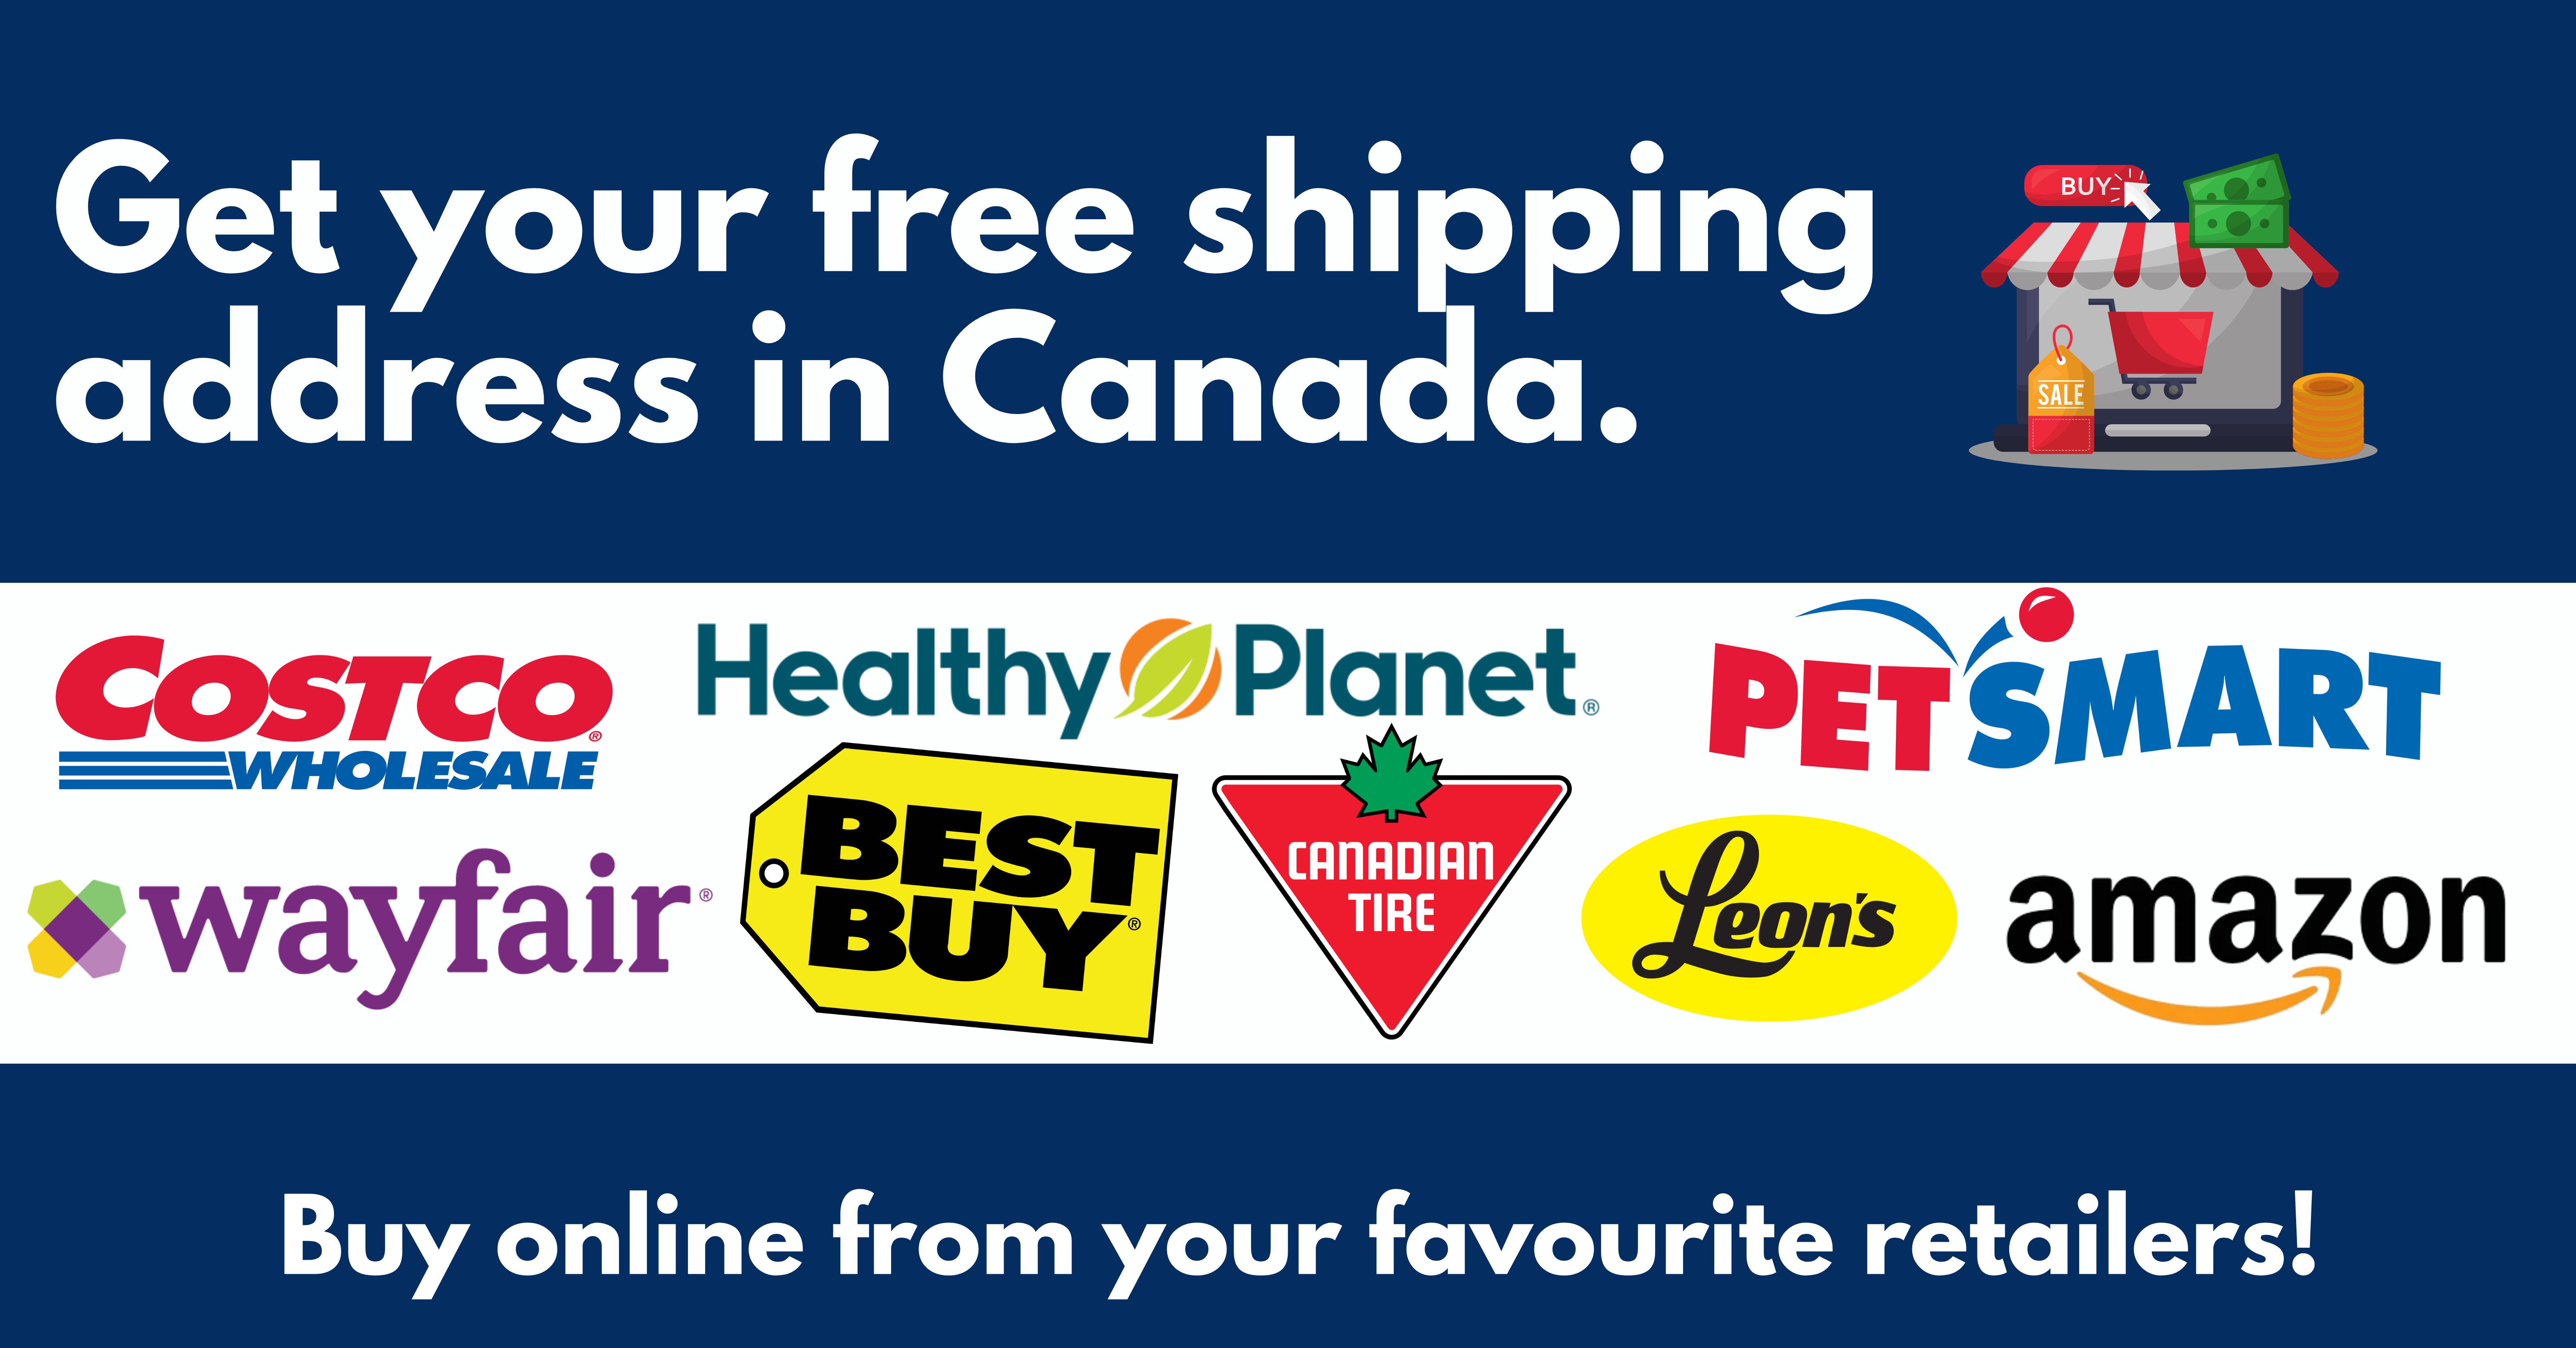 Get your free virtual Canadian address!